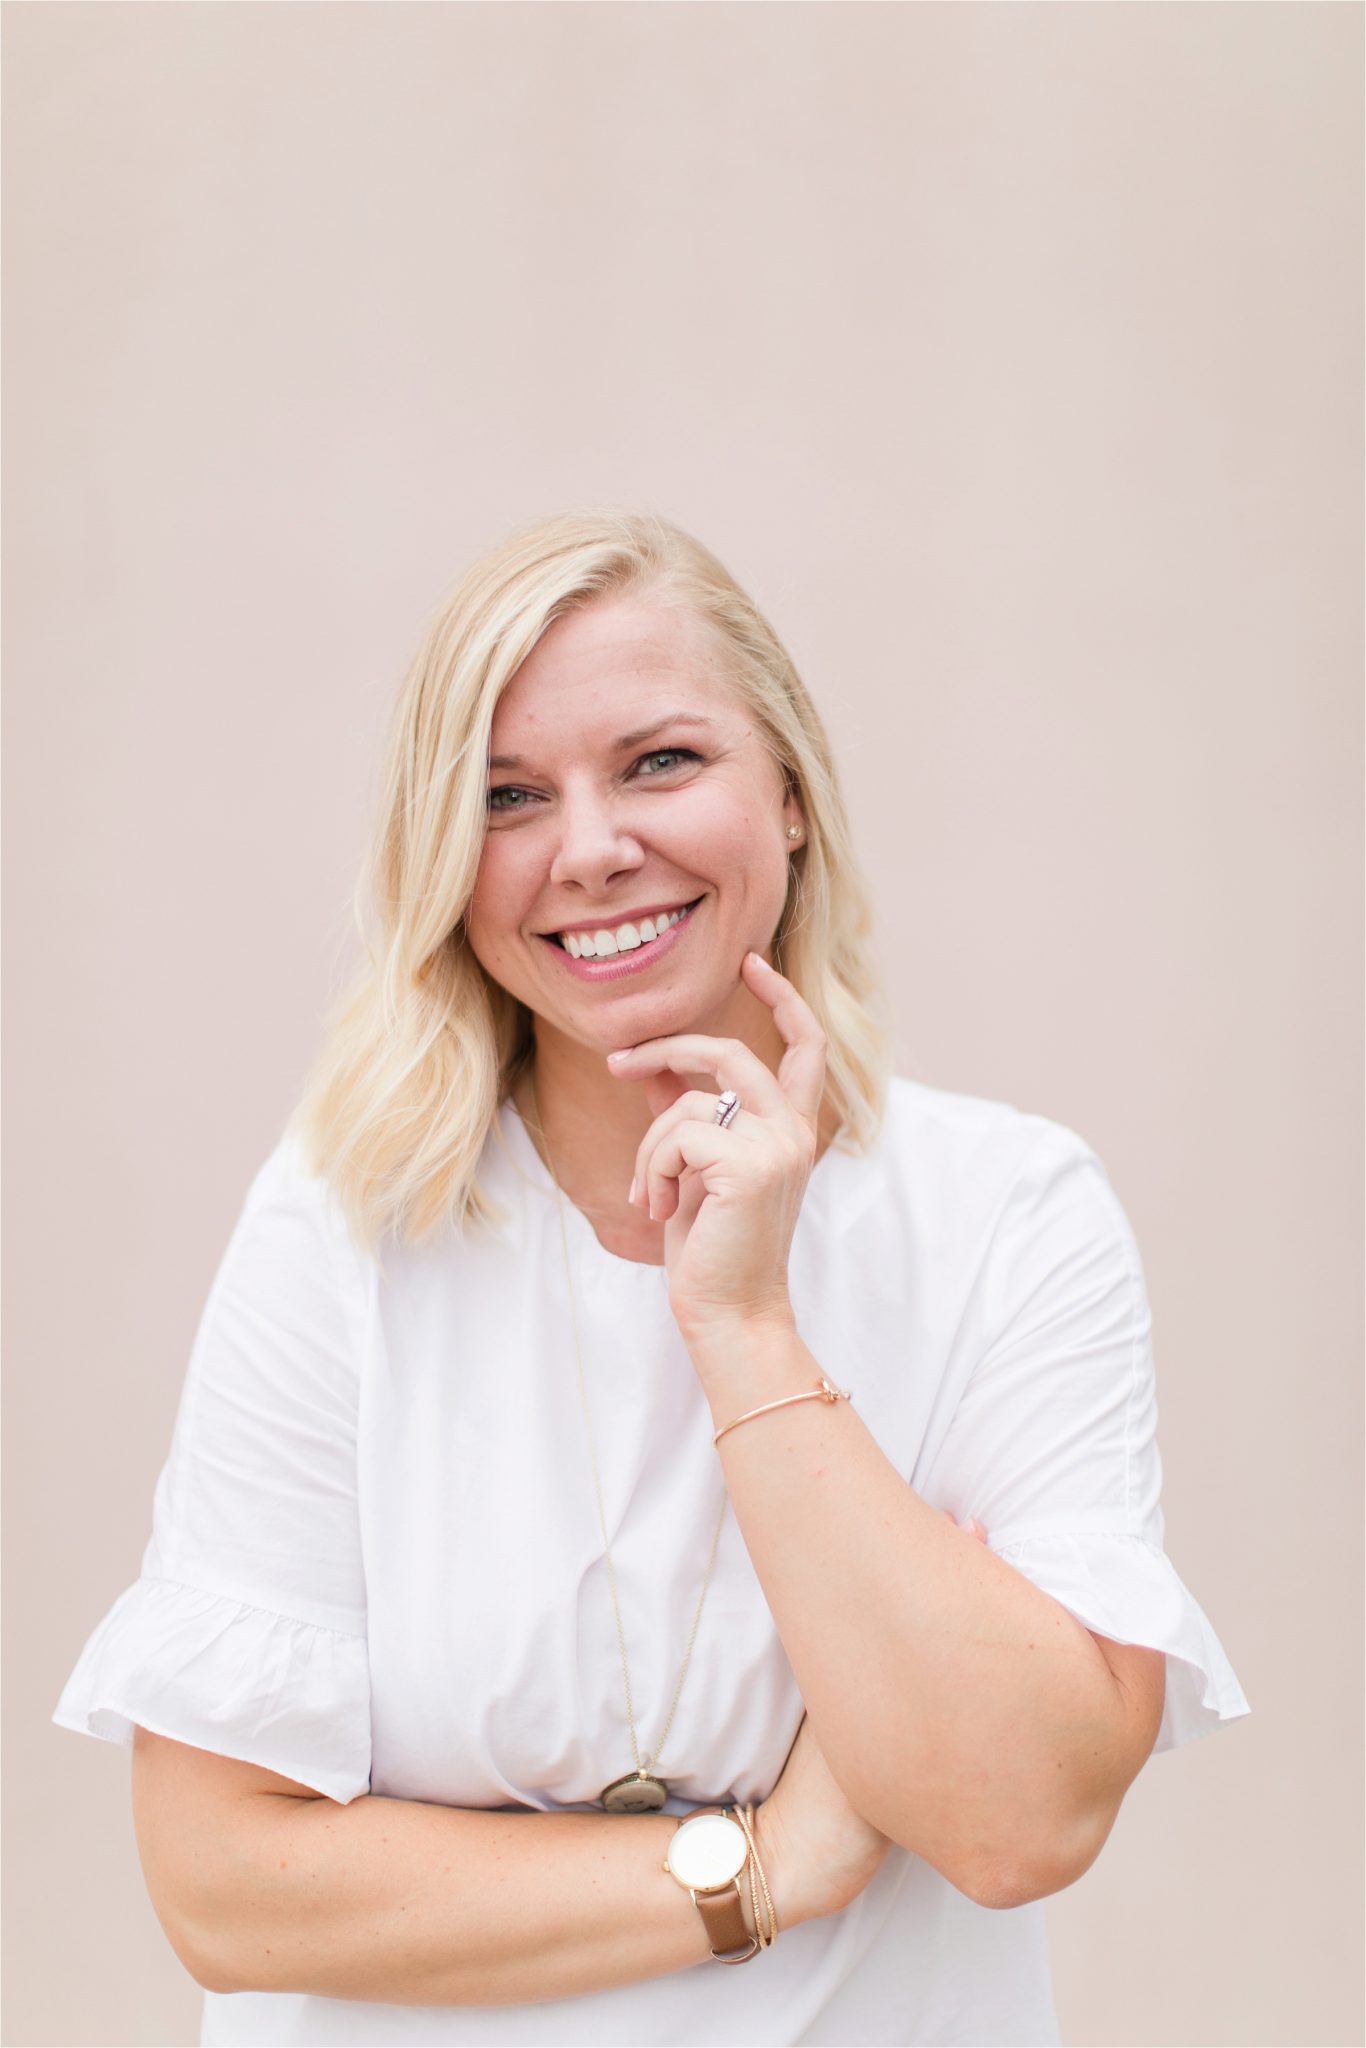 Head Shot Session for Small Business Owner-Kristin of Grace and Serendipity Paperie-Alabama photographer